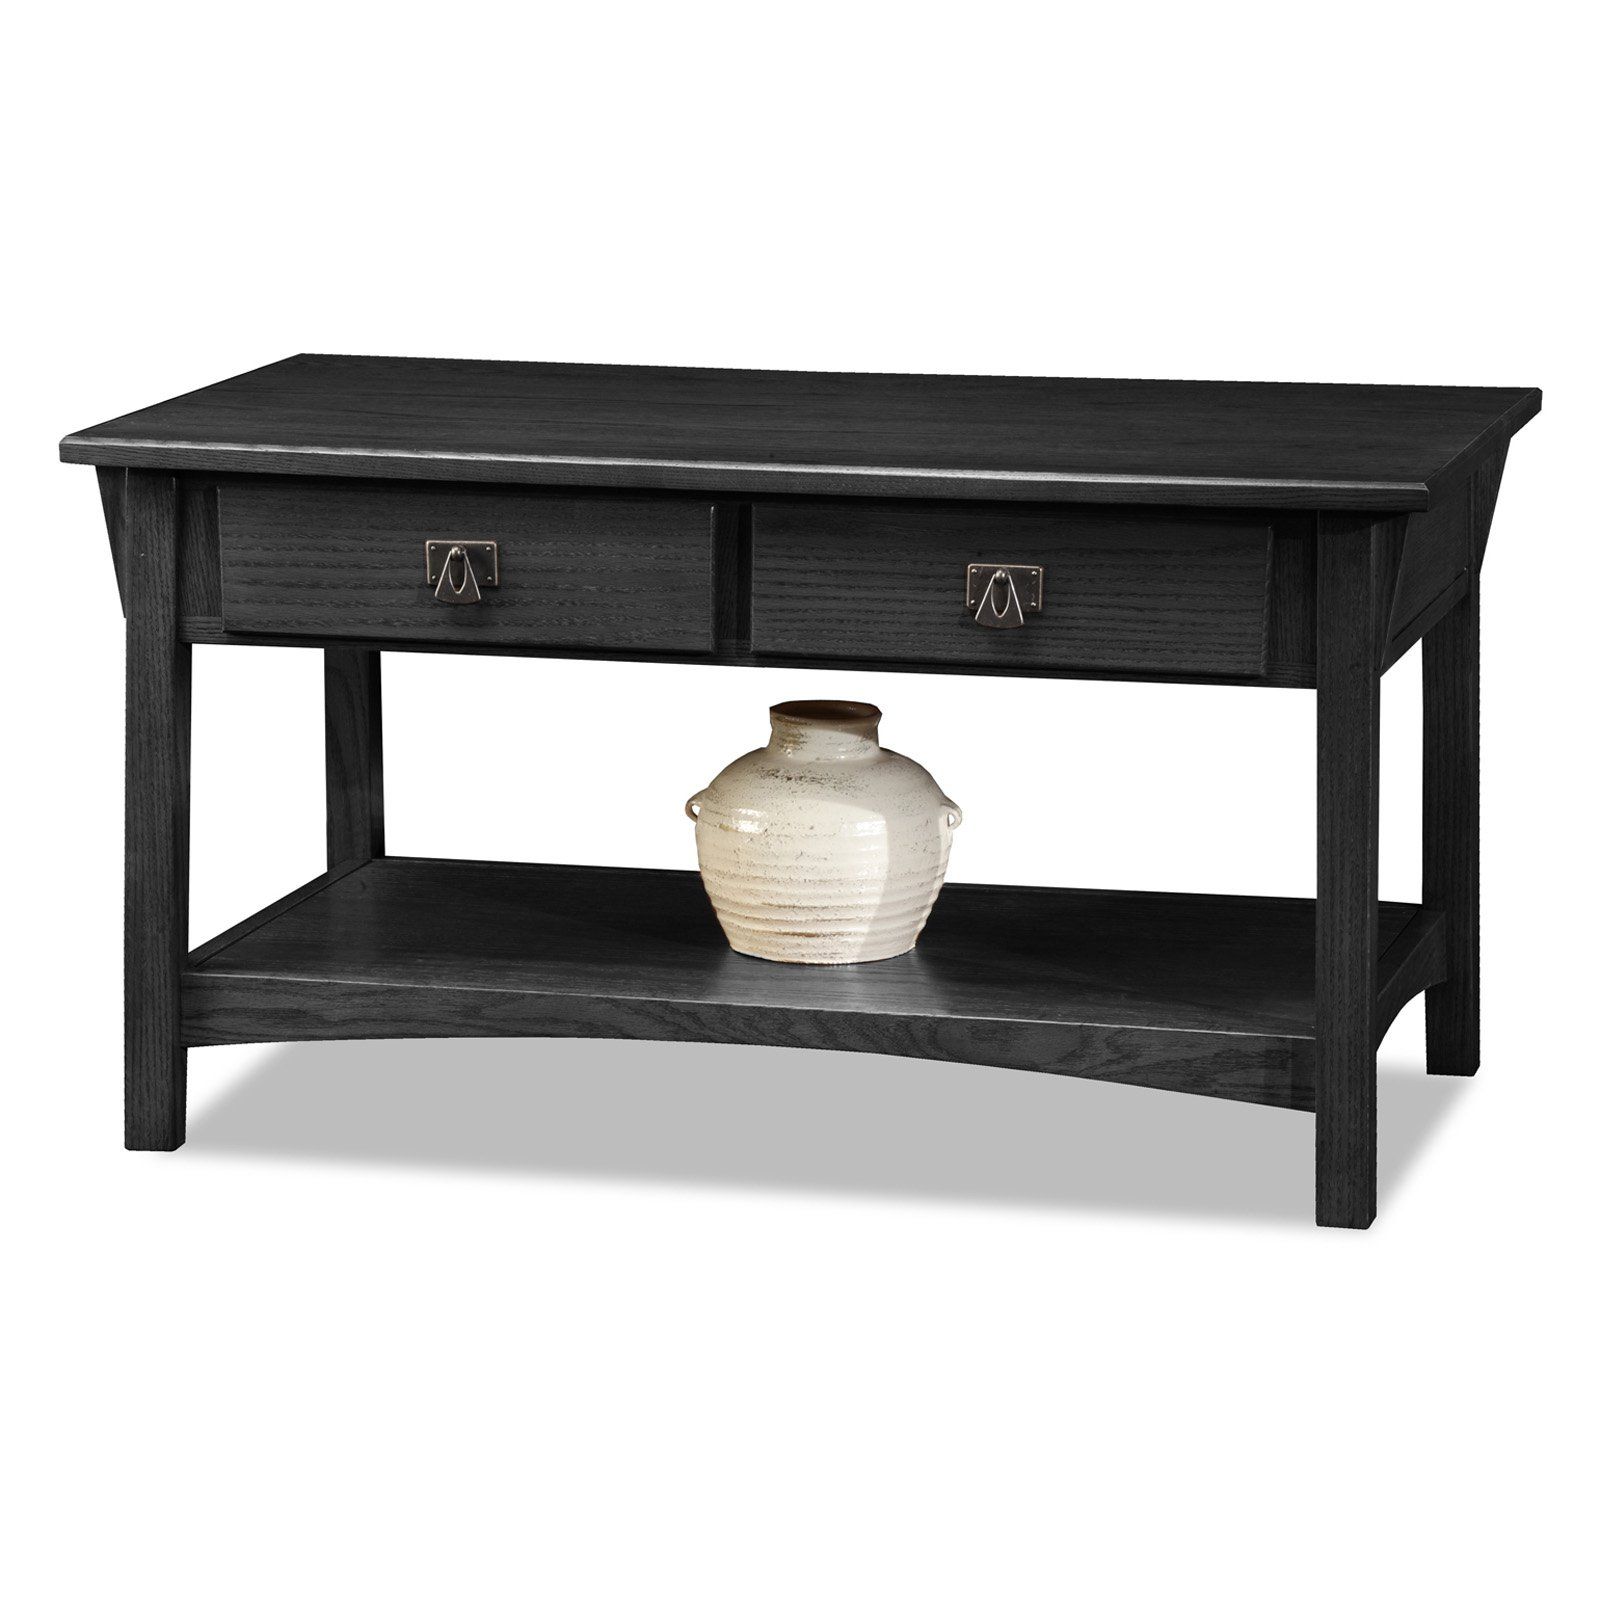 Leick Home Mission Two Drawer Coffee Table, Multiple Colors Regarding Recent Element Coffee Tables (View 16 of 20)